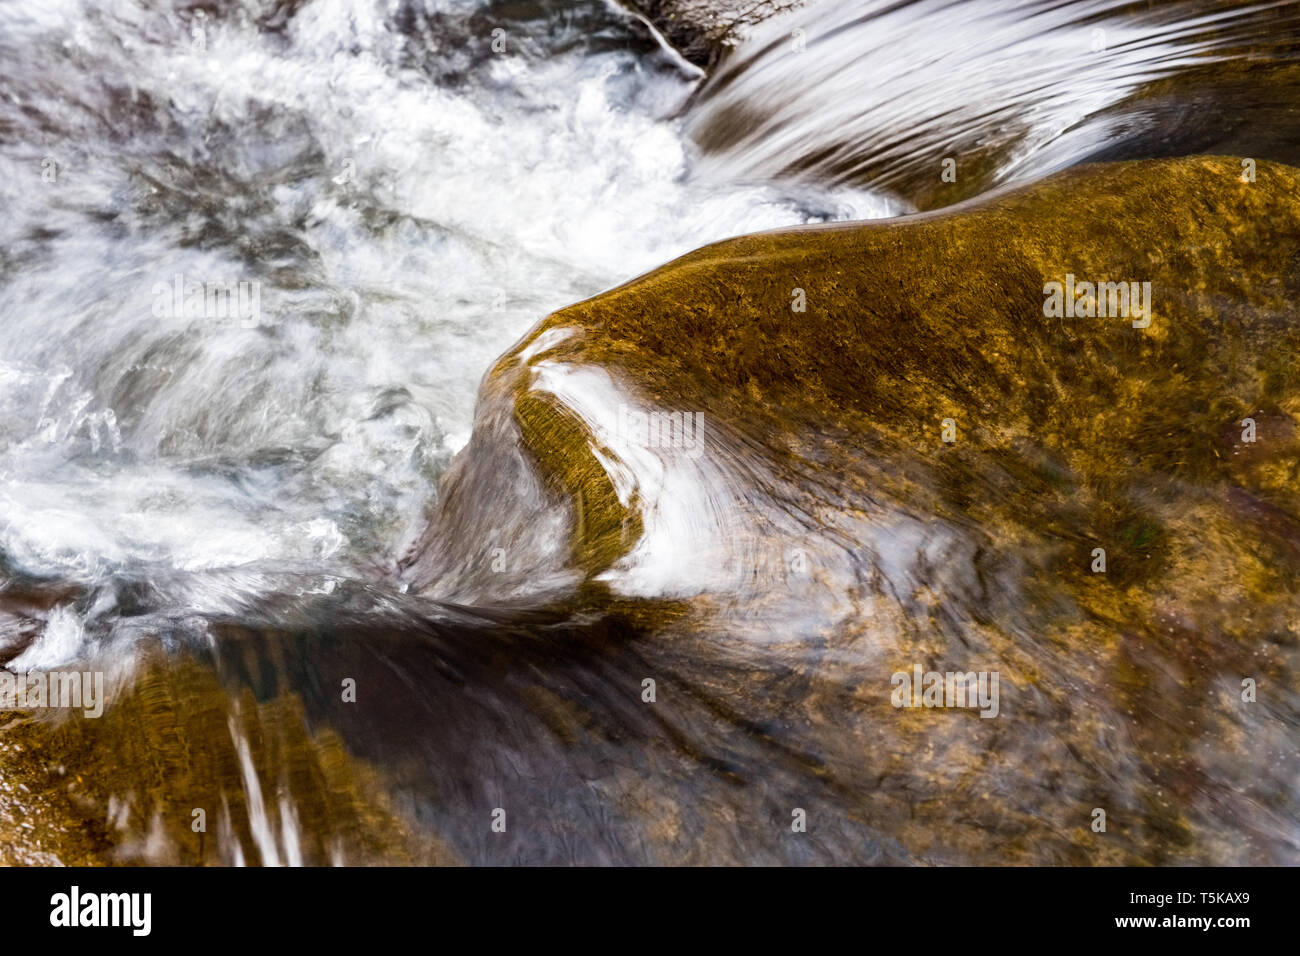 Water tumbling over rocks in a mountain stream Stock Photo